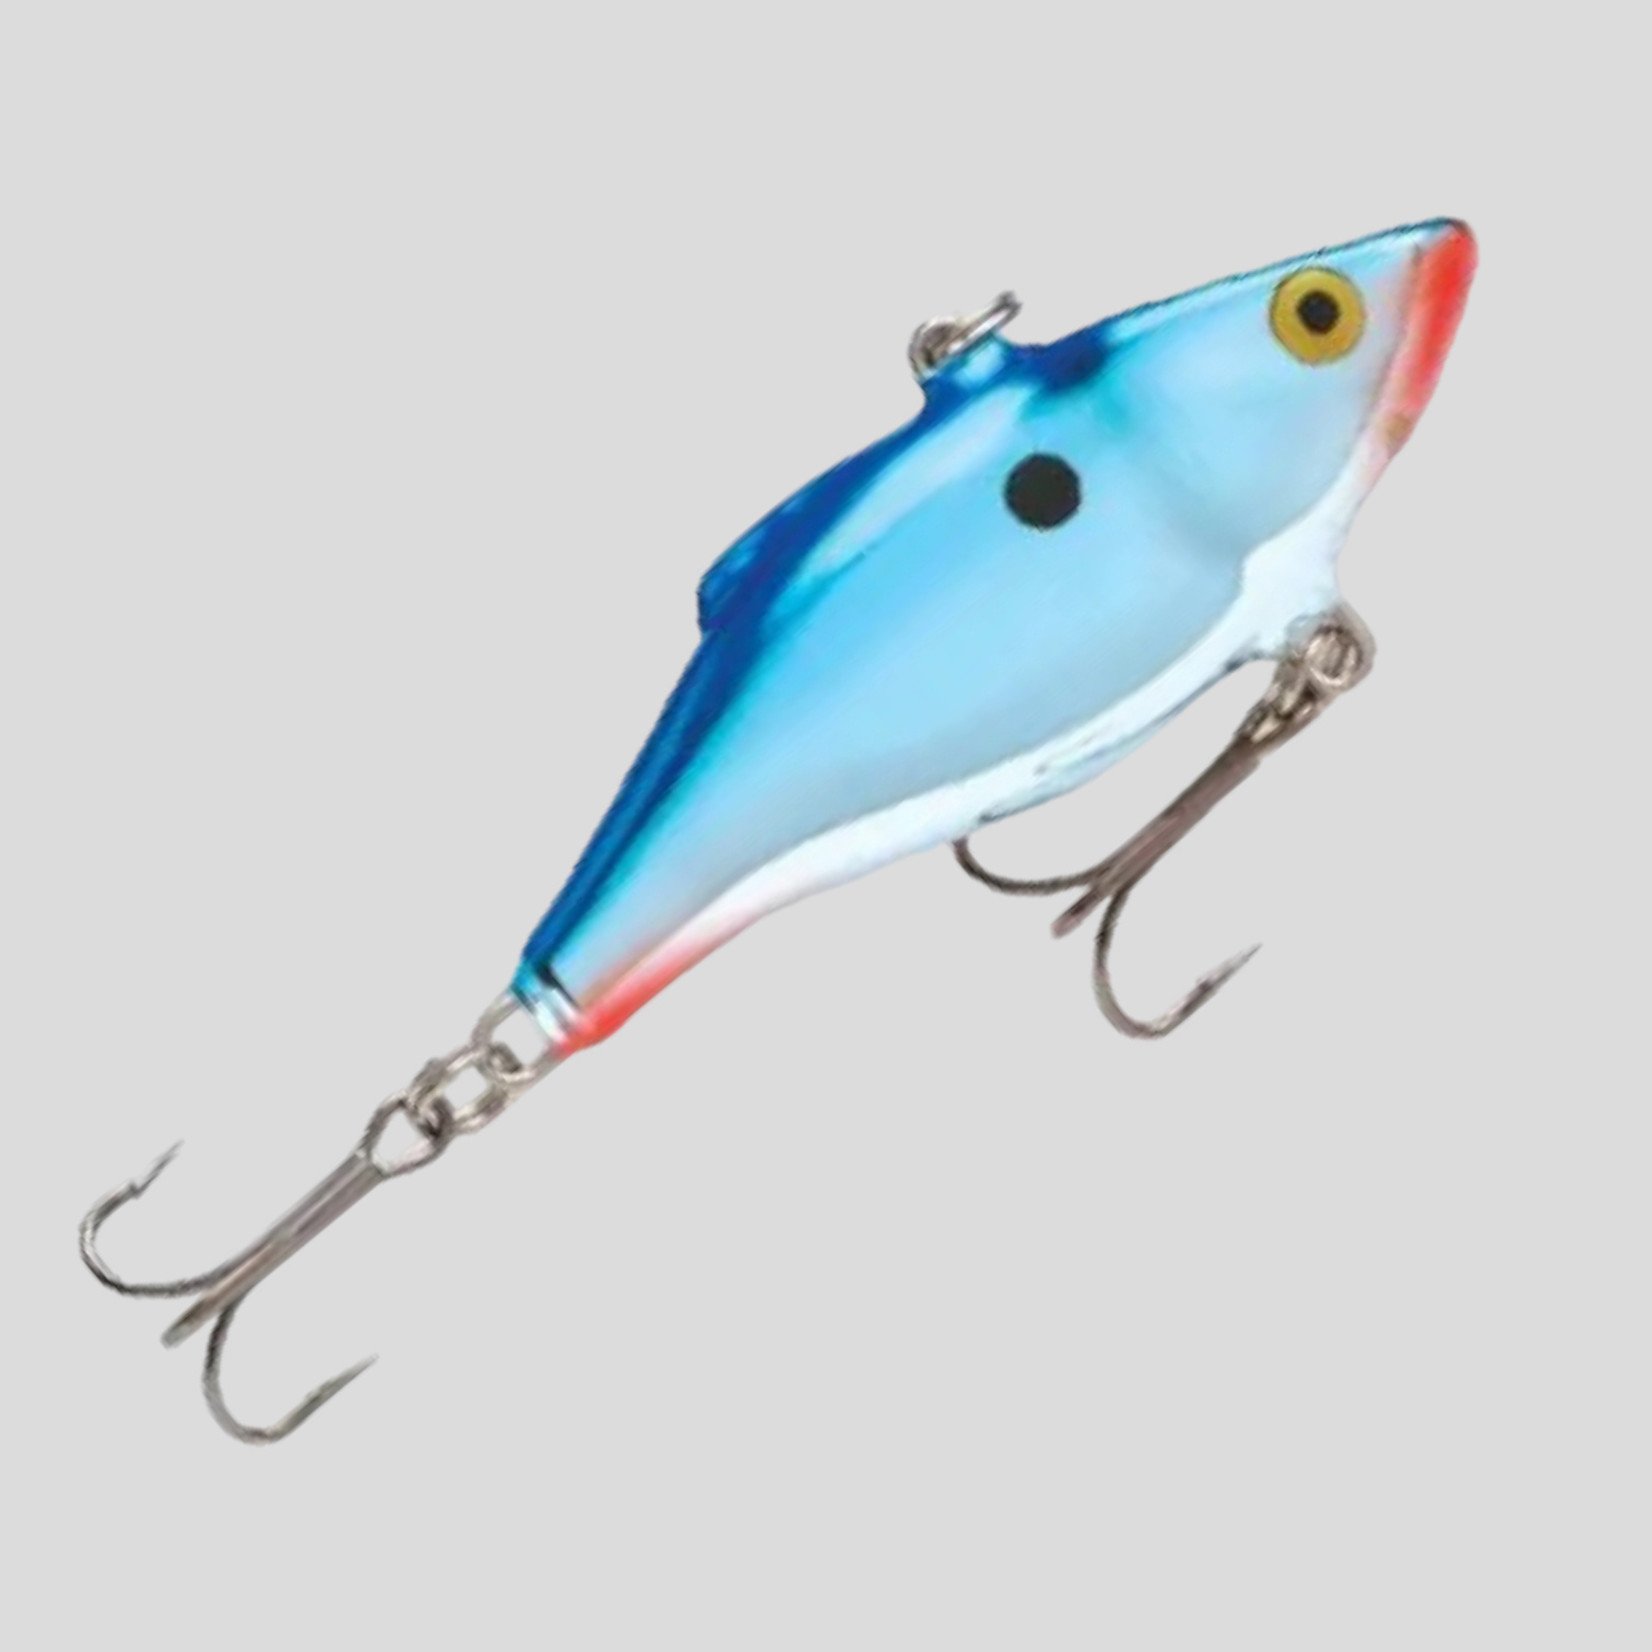 Rapala Rattlin 05 Fishing Lure Bluegill Size- 2 for sale online